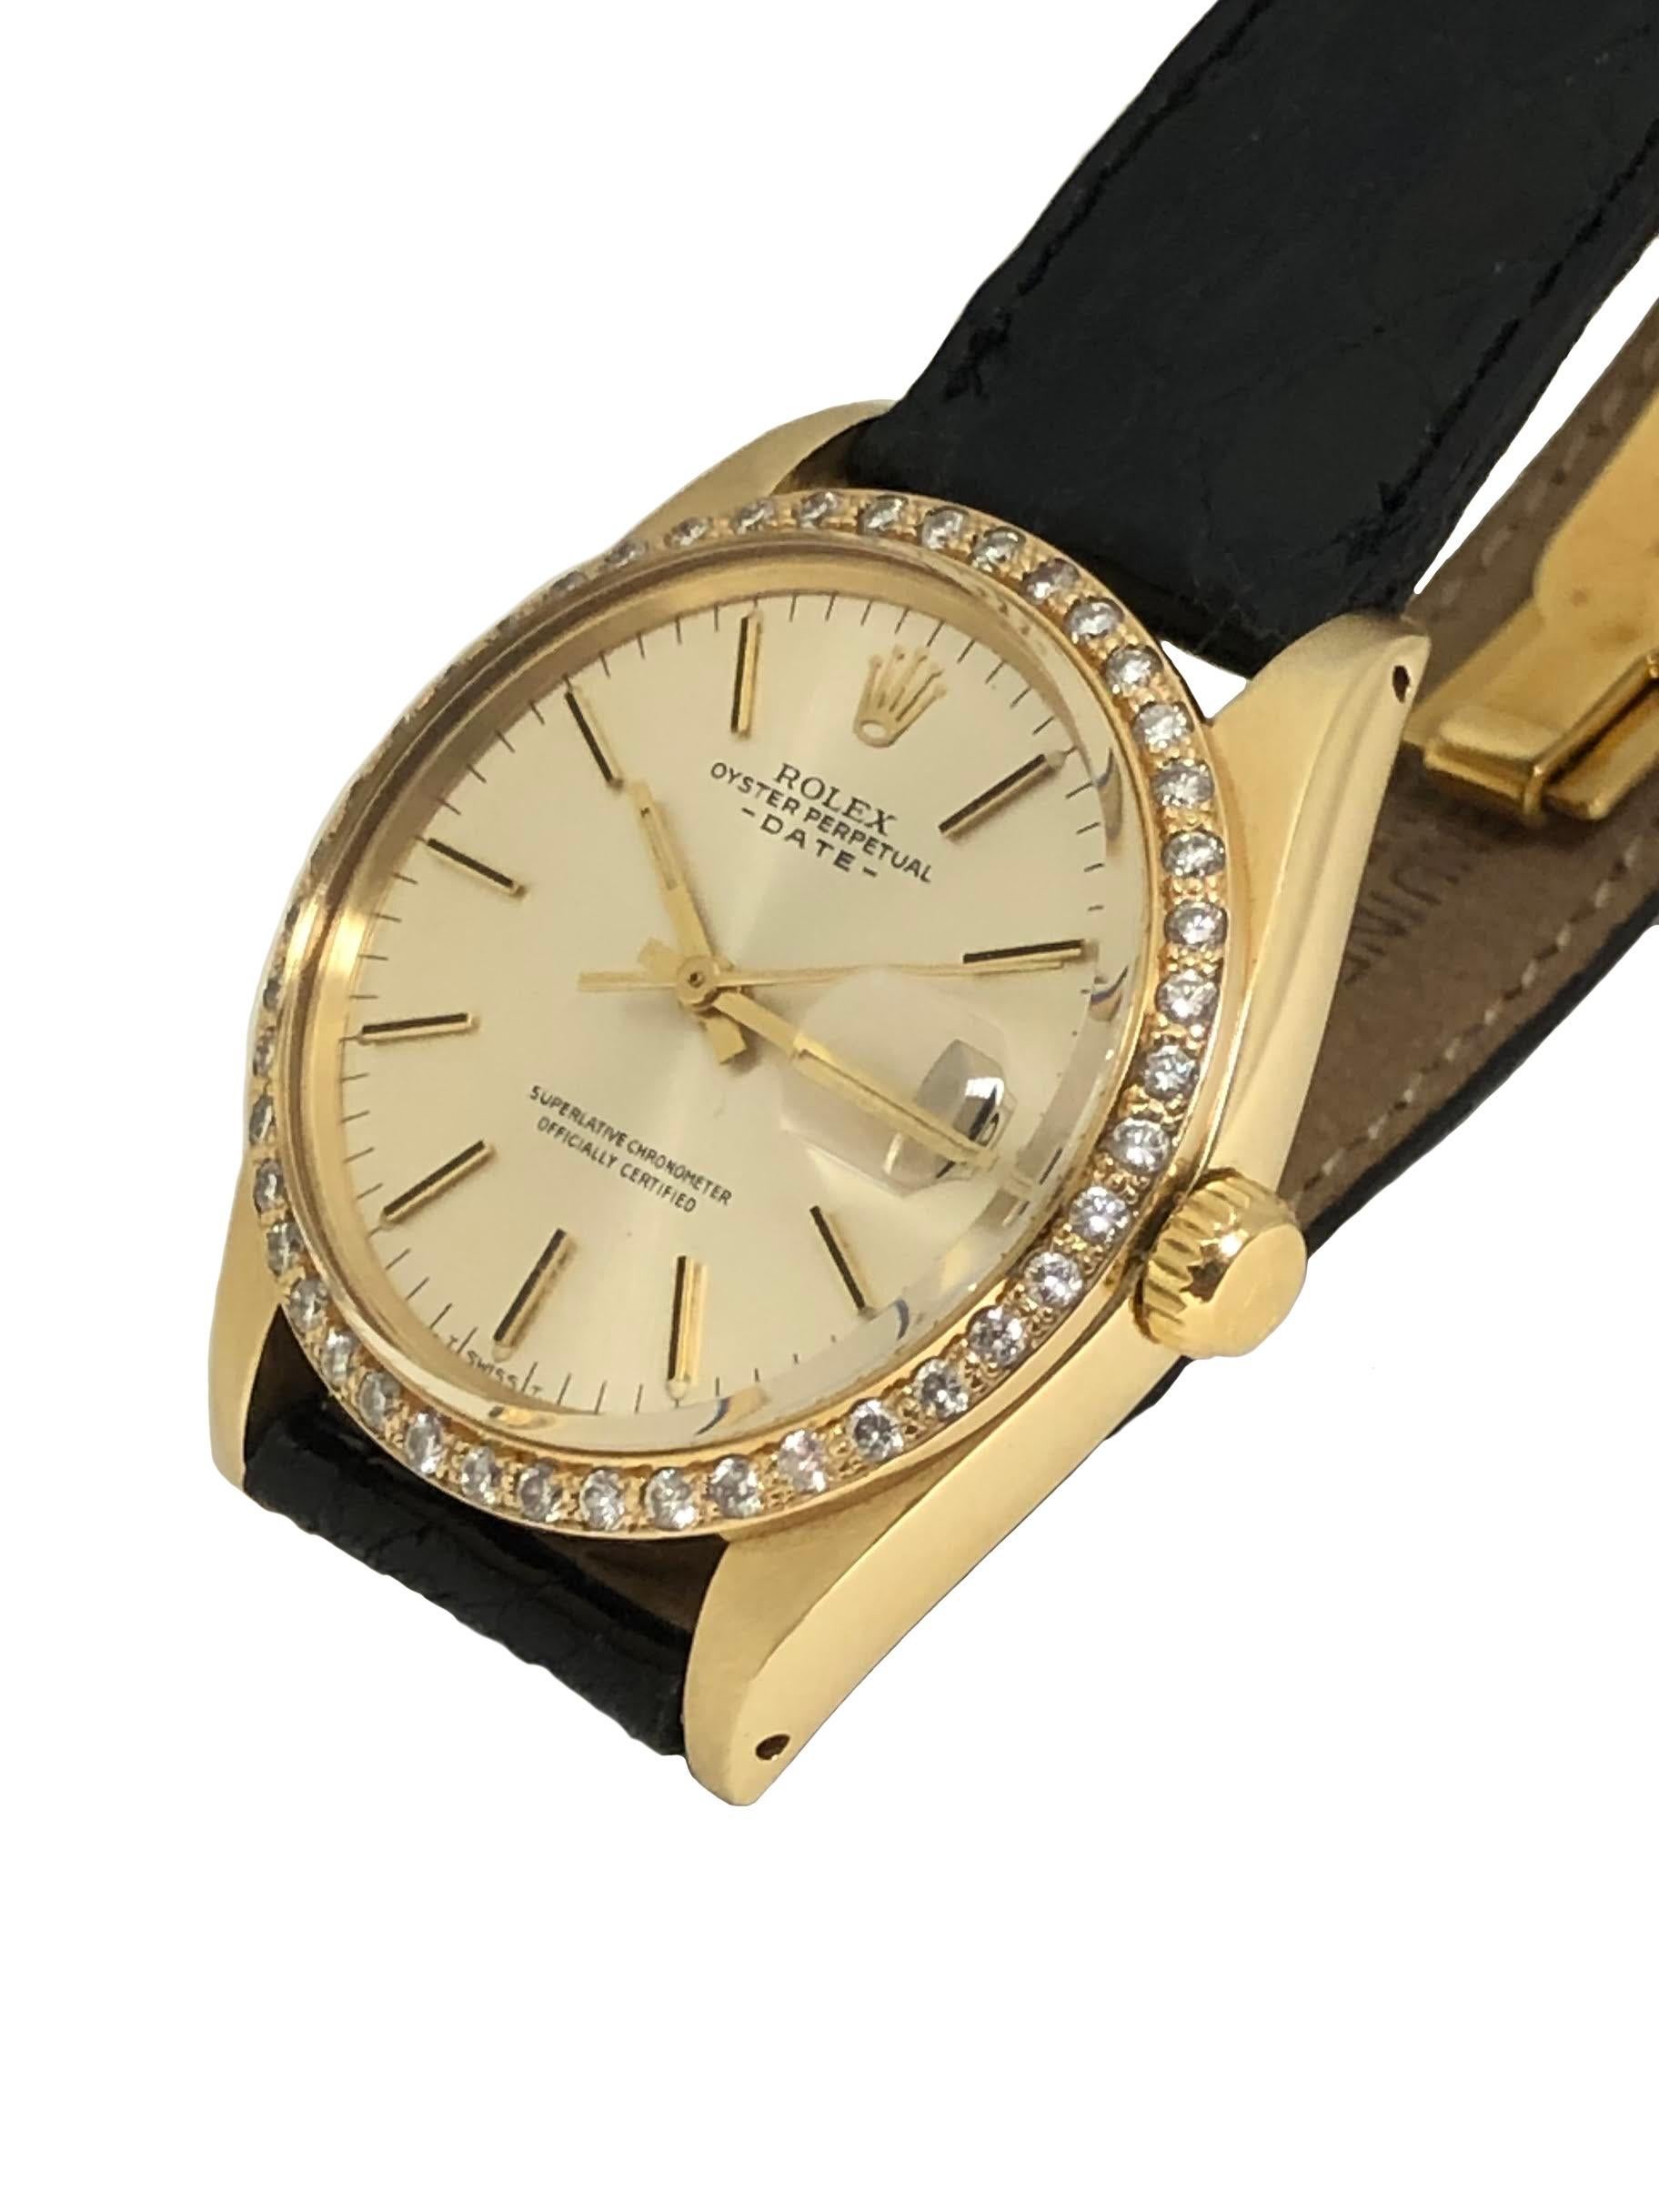 Circa 1978 Rolex Date, Reference 1570, 34 M.M. 14K Yellow Gold 3 Piece Oyster Case with Custom Diamond Bezel approximately 1 Carat. Caliber 1570 Automatic, Self Winding movement, Silver Satin dial with Raised Yellow Baton Markers, sweep seconds hand